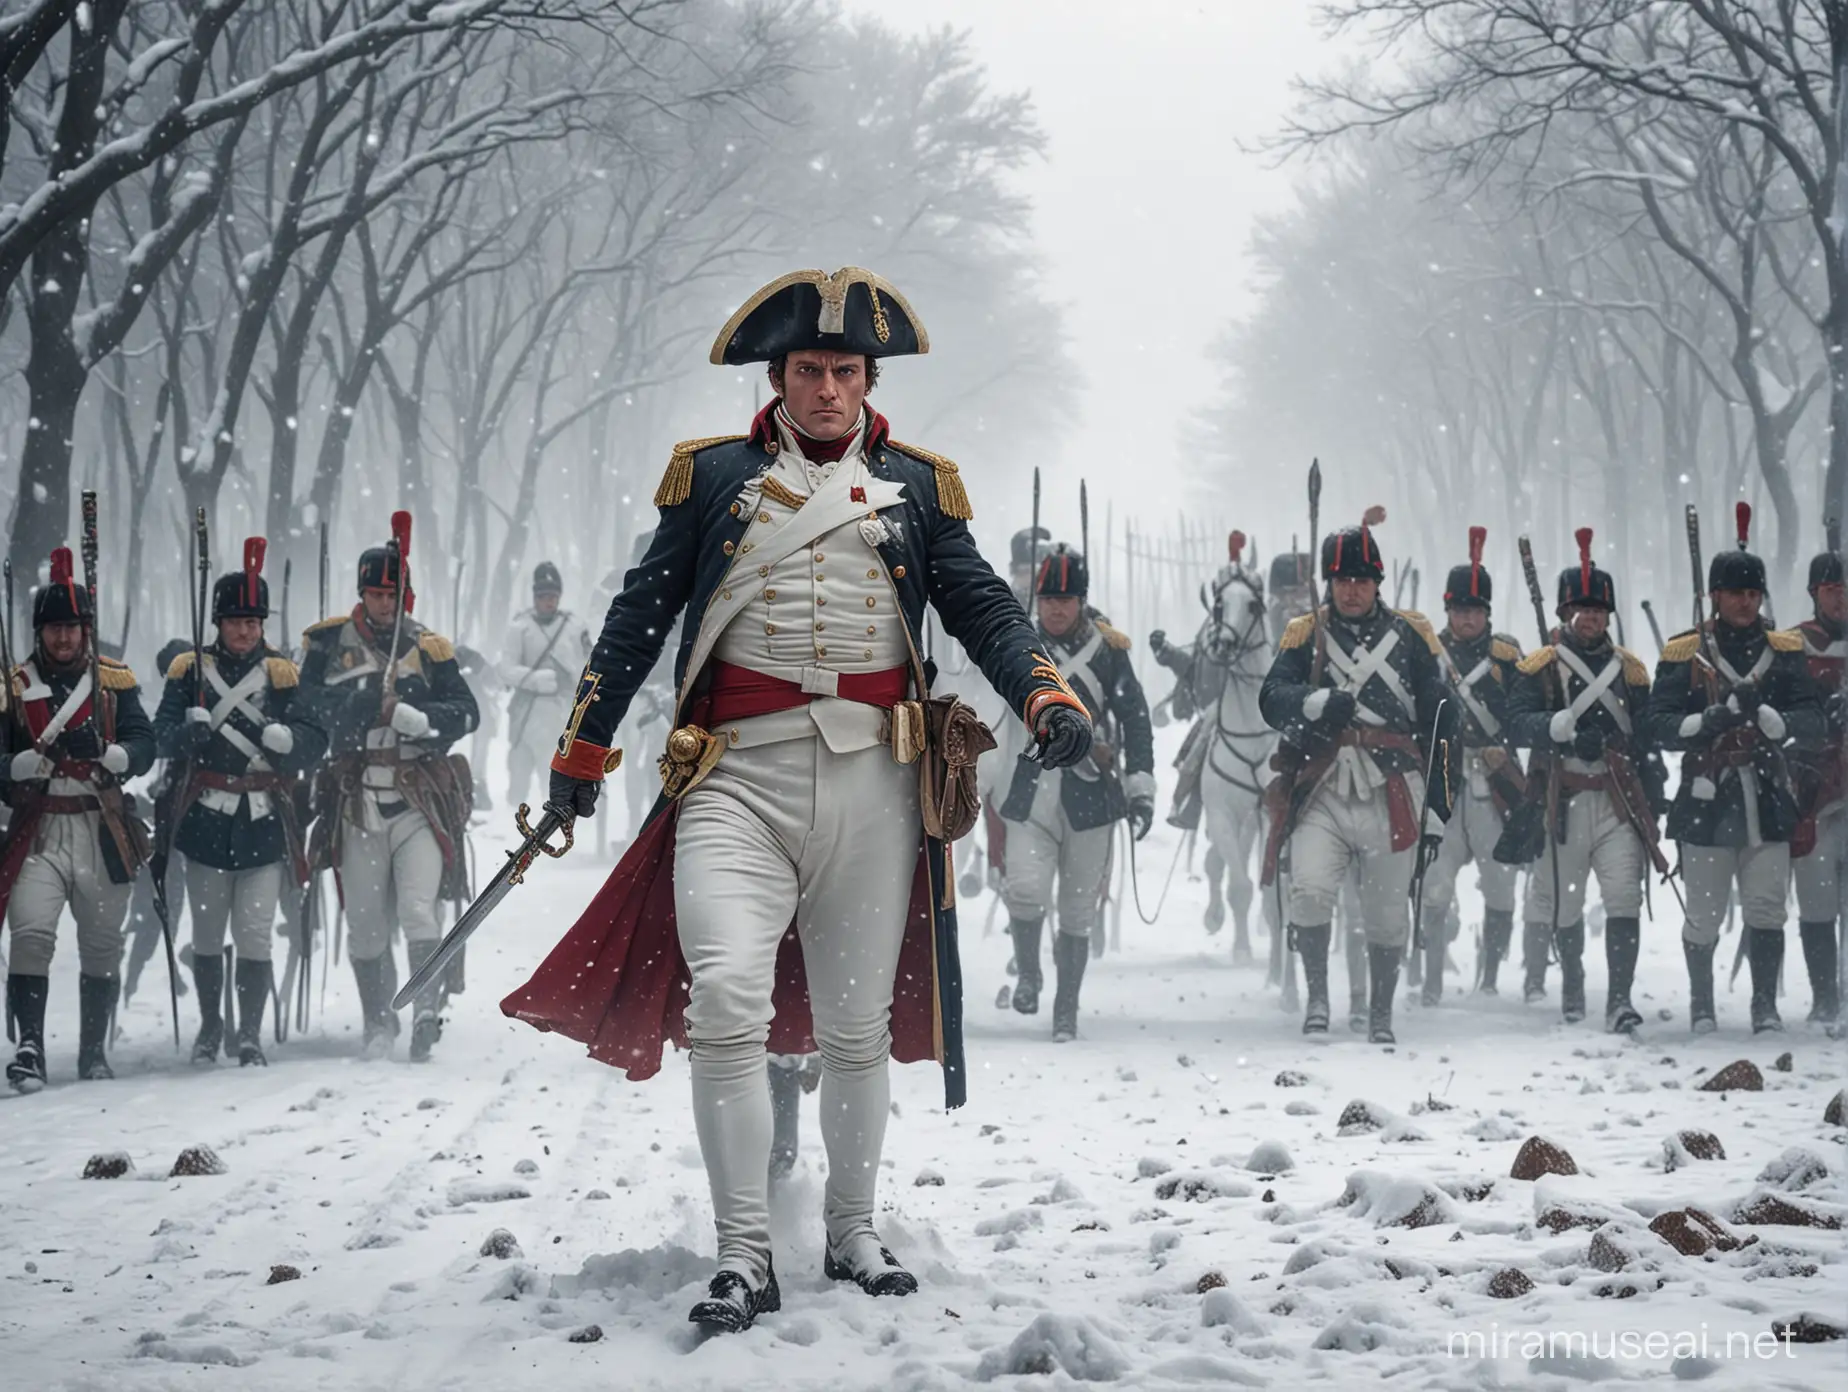 Napoleon holding sword straight up and followed by soldiers walking in winter and extreme snowfall closeup with a realistic face